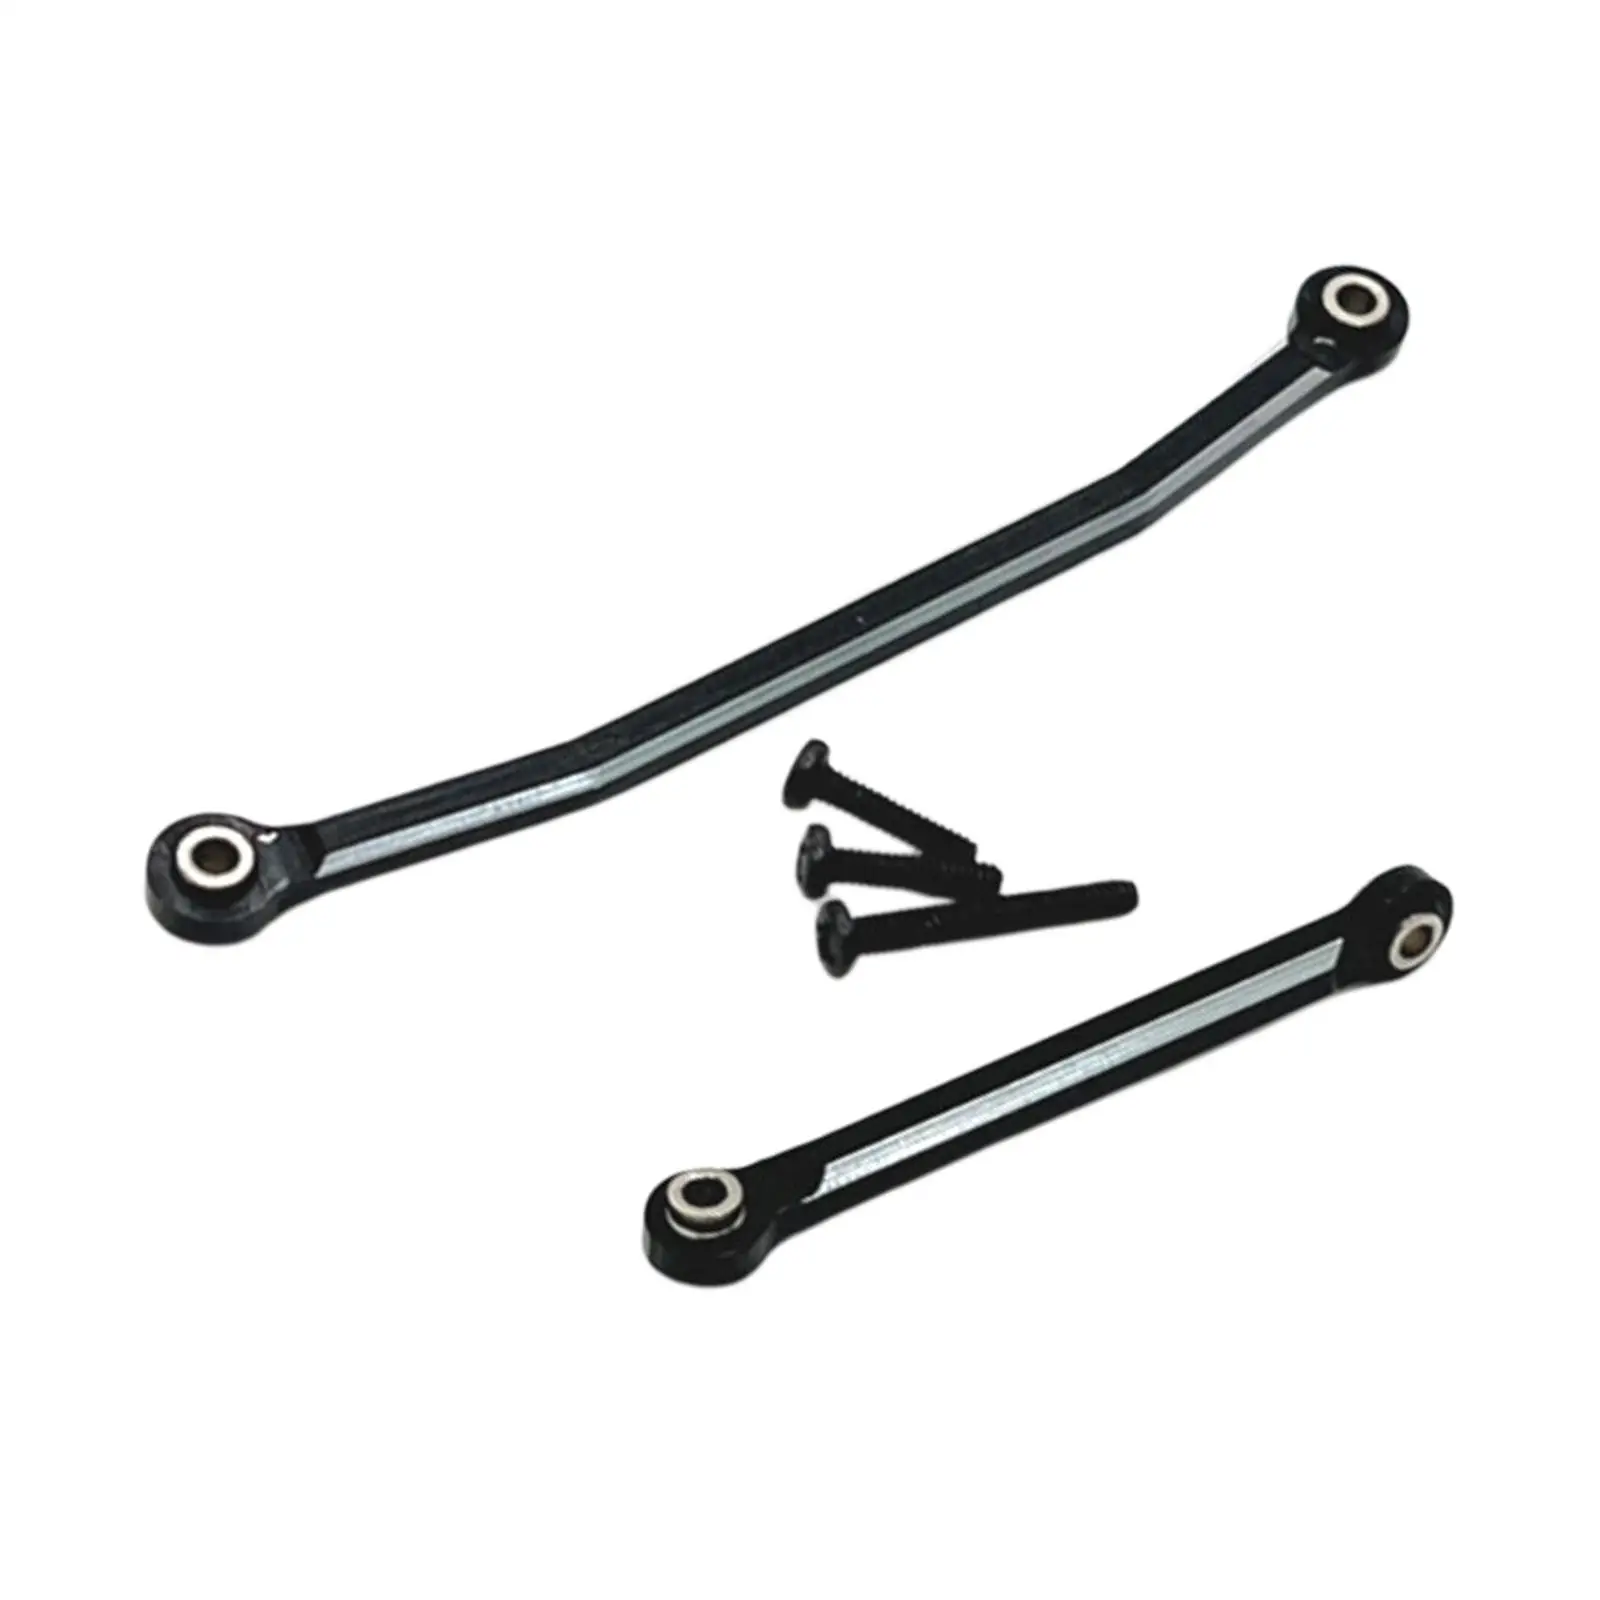 1/24 Scale Steering Rod Metal DIY with Screws Stable Durable for Fcx24 RC Vehicle Accessories Repair Parts Replacement Fitments